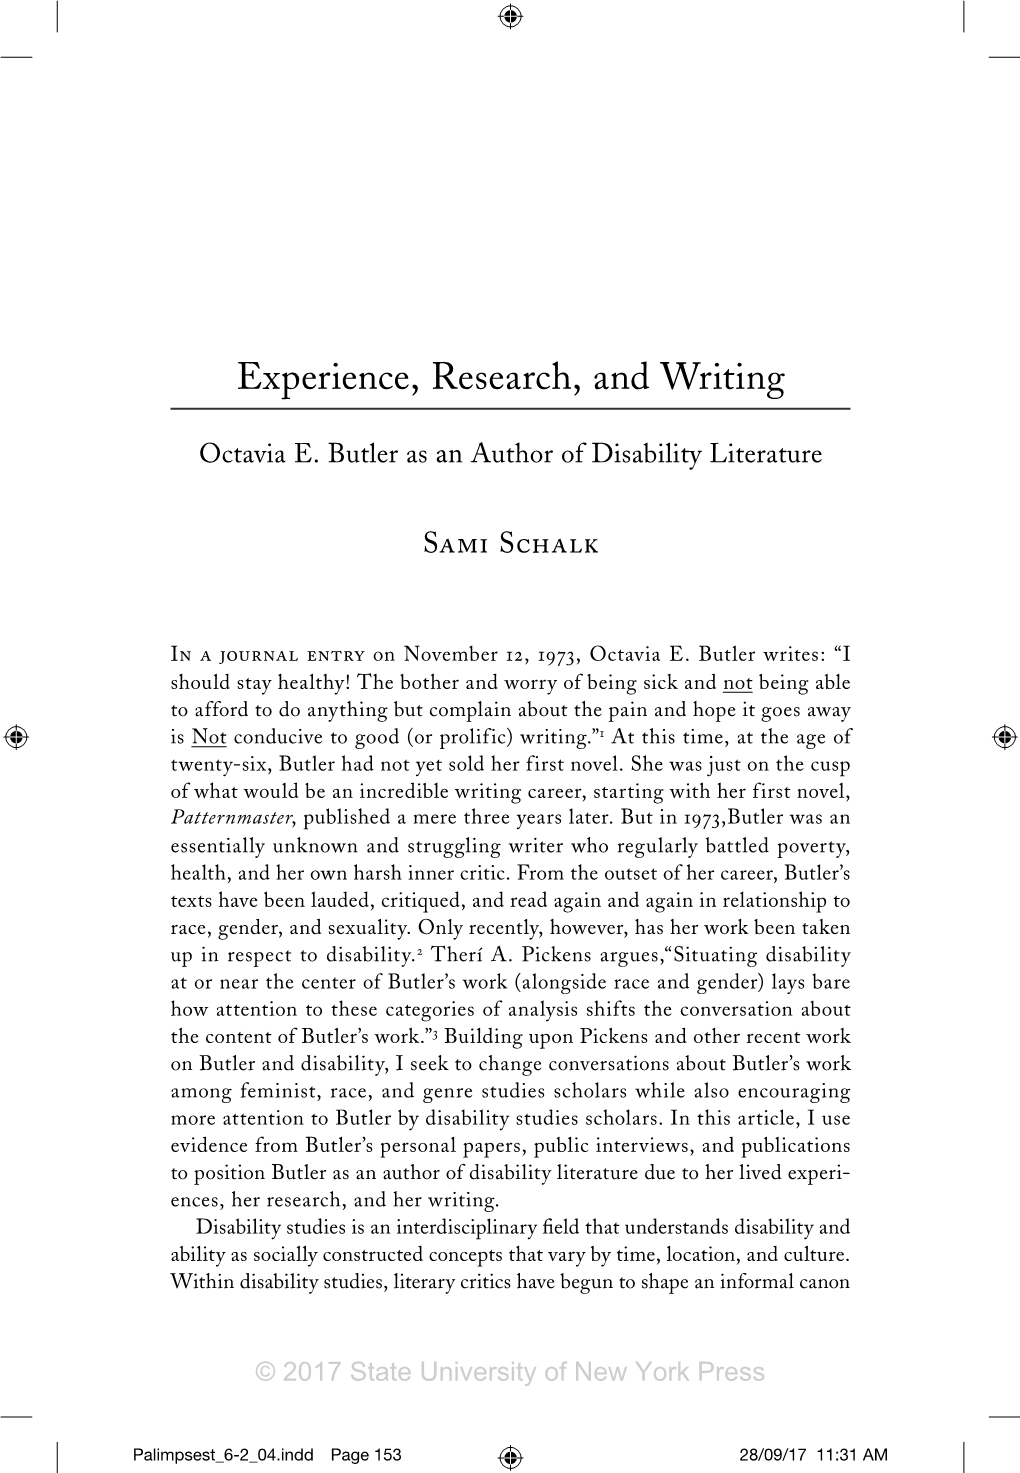 Experience, Research, and Writing: Octavia E. Butler As an Author Of